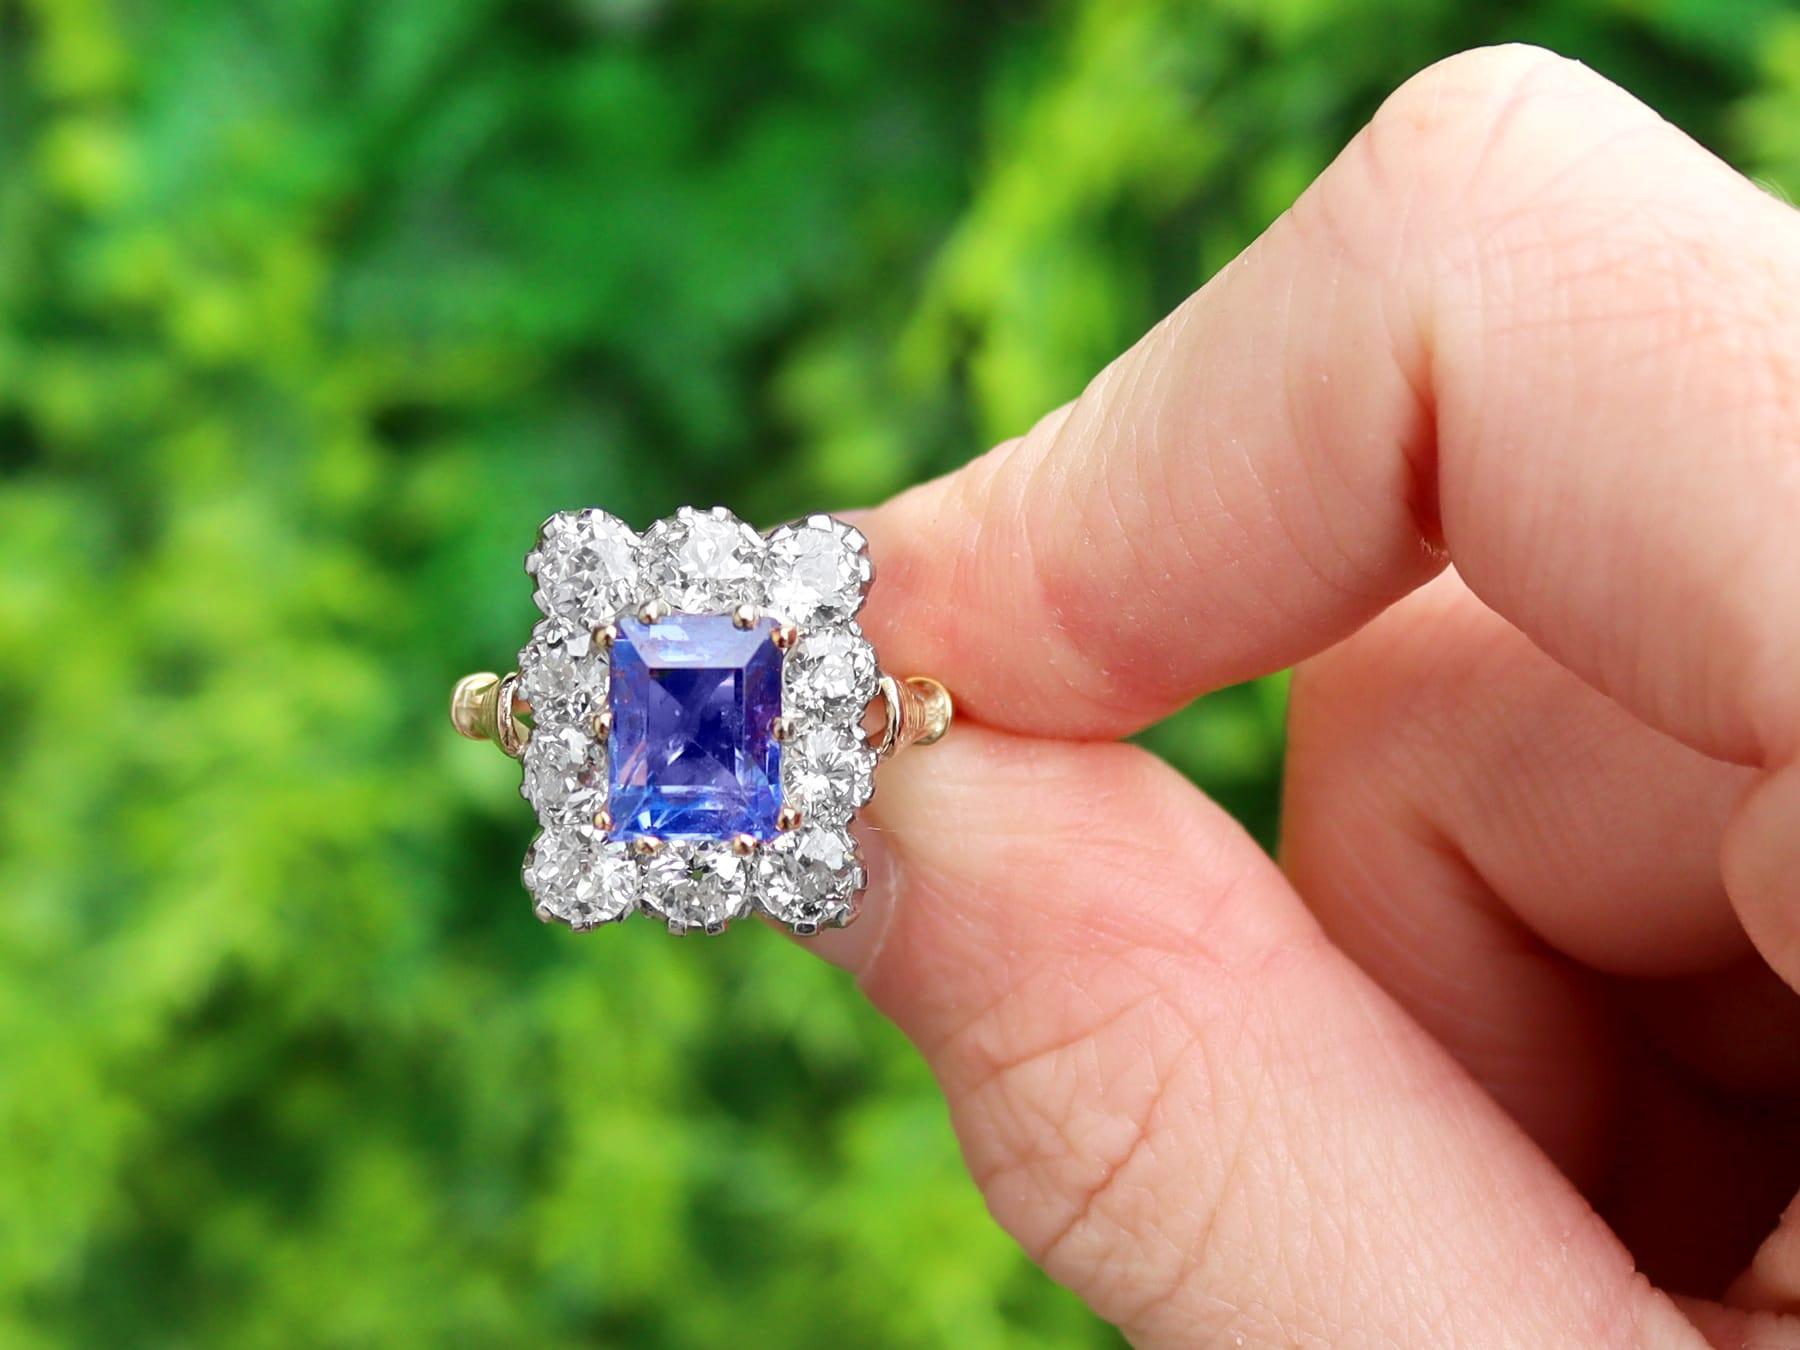 A stunning and impressive antique 3.43 carat Ceylon rectangular step cut sapphire and 2.95 carat diamond, 18 karat yellow gold and 18 karat white gold set cluster ring; part of our diverse antique jewellery and estate jewelry collections.

This